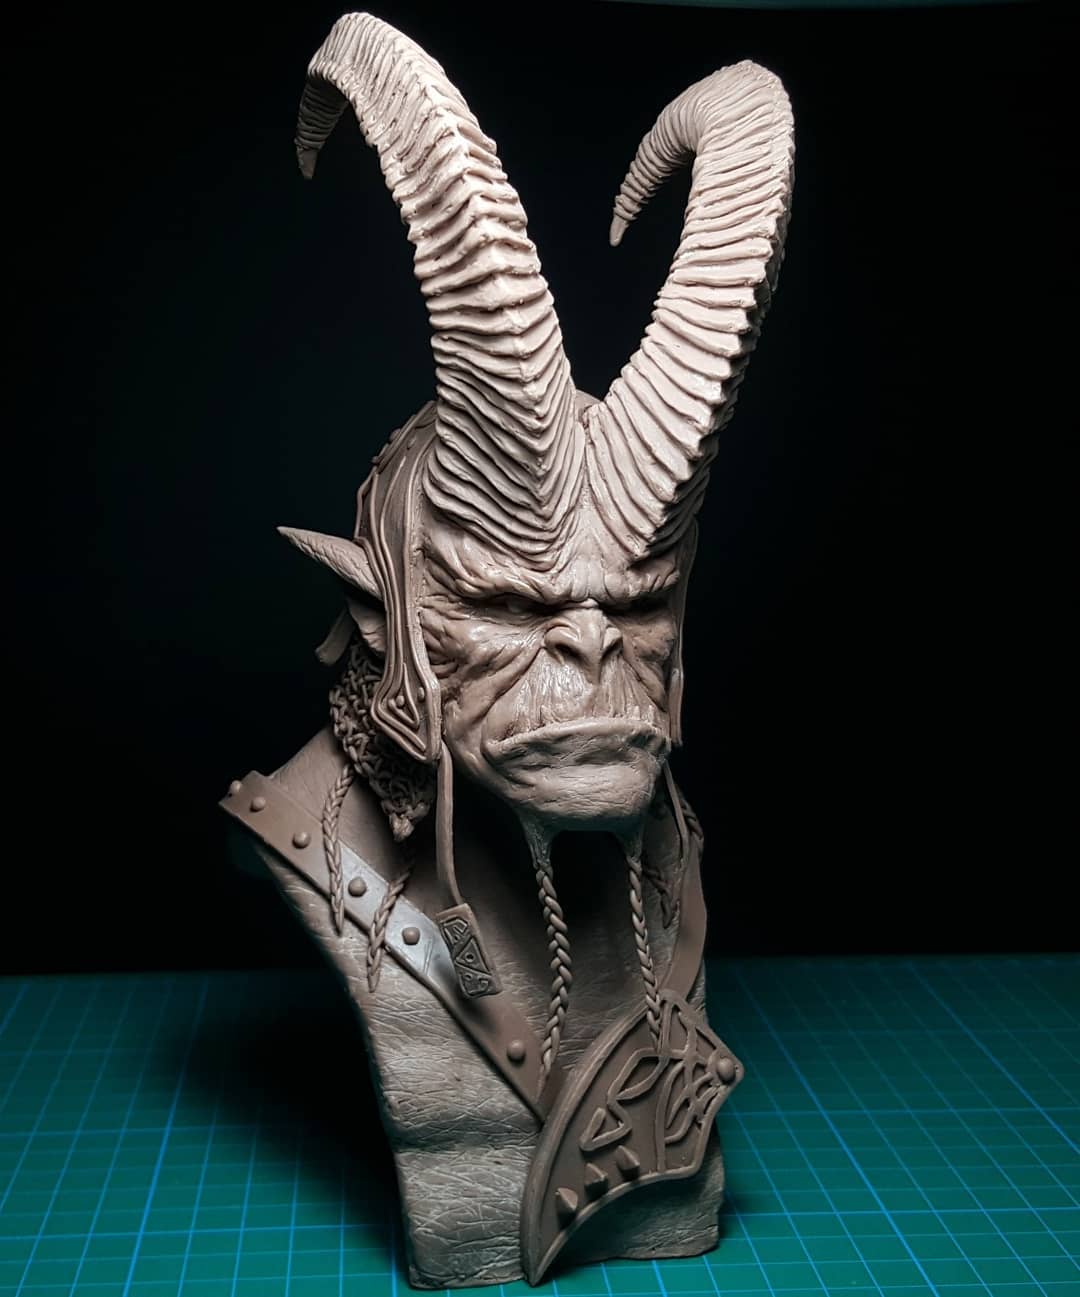 Monster Clay - Monster Clay Sculpt of the Day 09/23/18 📷 : @kaidan415 -  #Repost - #art #characterdesign #clay #claysculpture #ilovemonsterclay  #mcsotd #monster #monsterart #monsterclay #monstermakers #oilbasedclay  #oilclay #sculpting #sculptoftheday